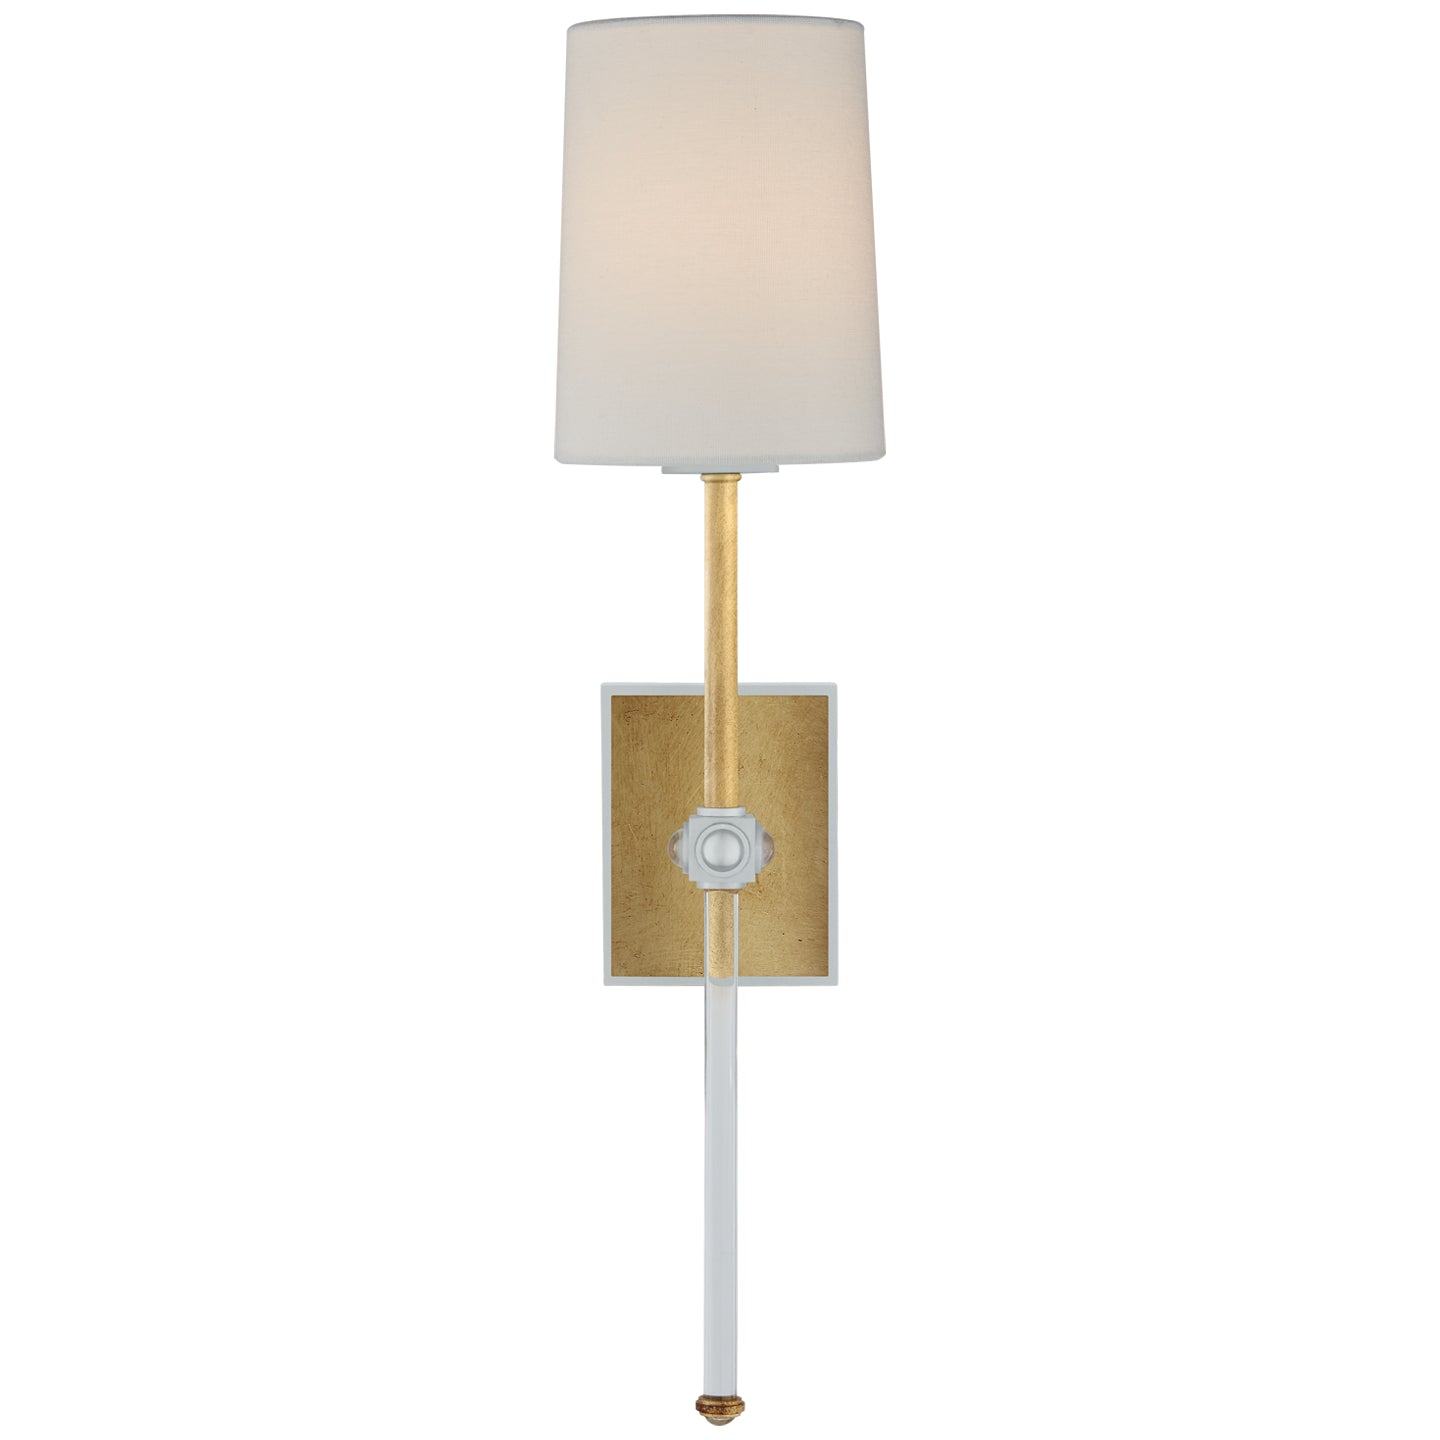 Visual Comfort Signature - JN 2051G/CG-L - One Light Wall Sconce - Lucia - Gild and Crystal